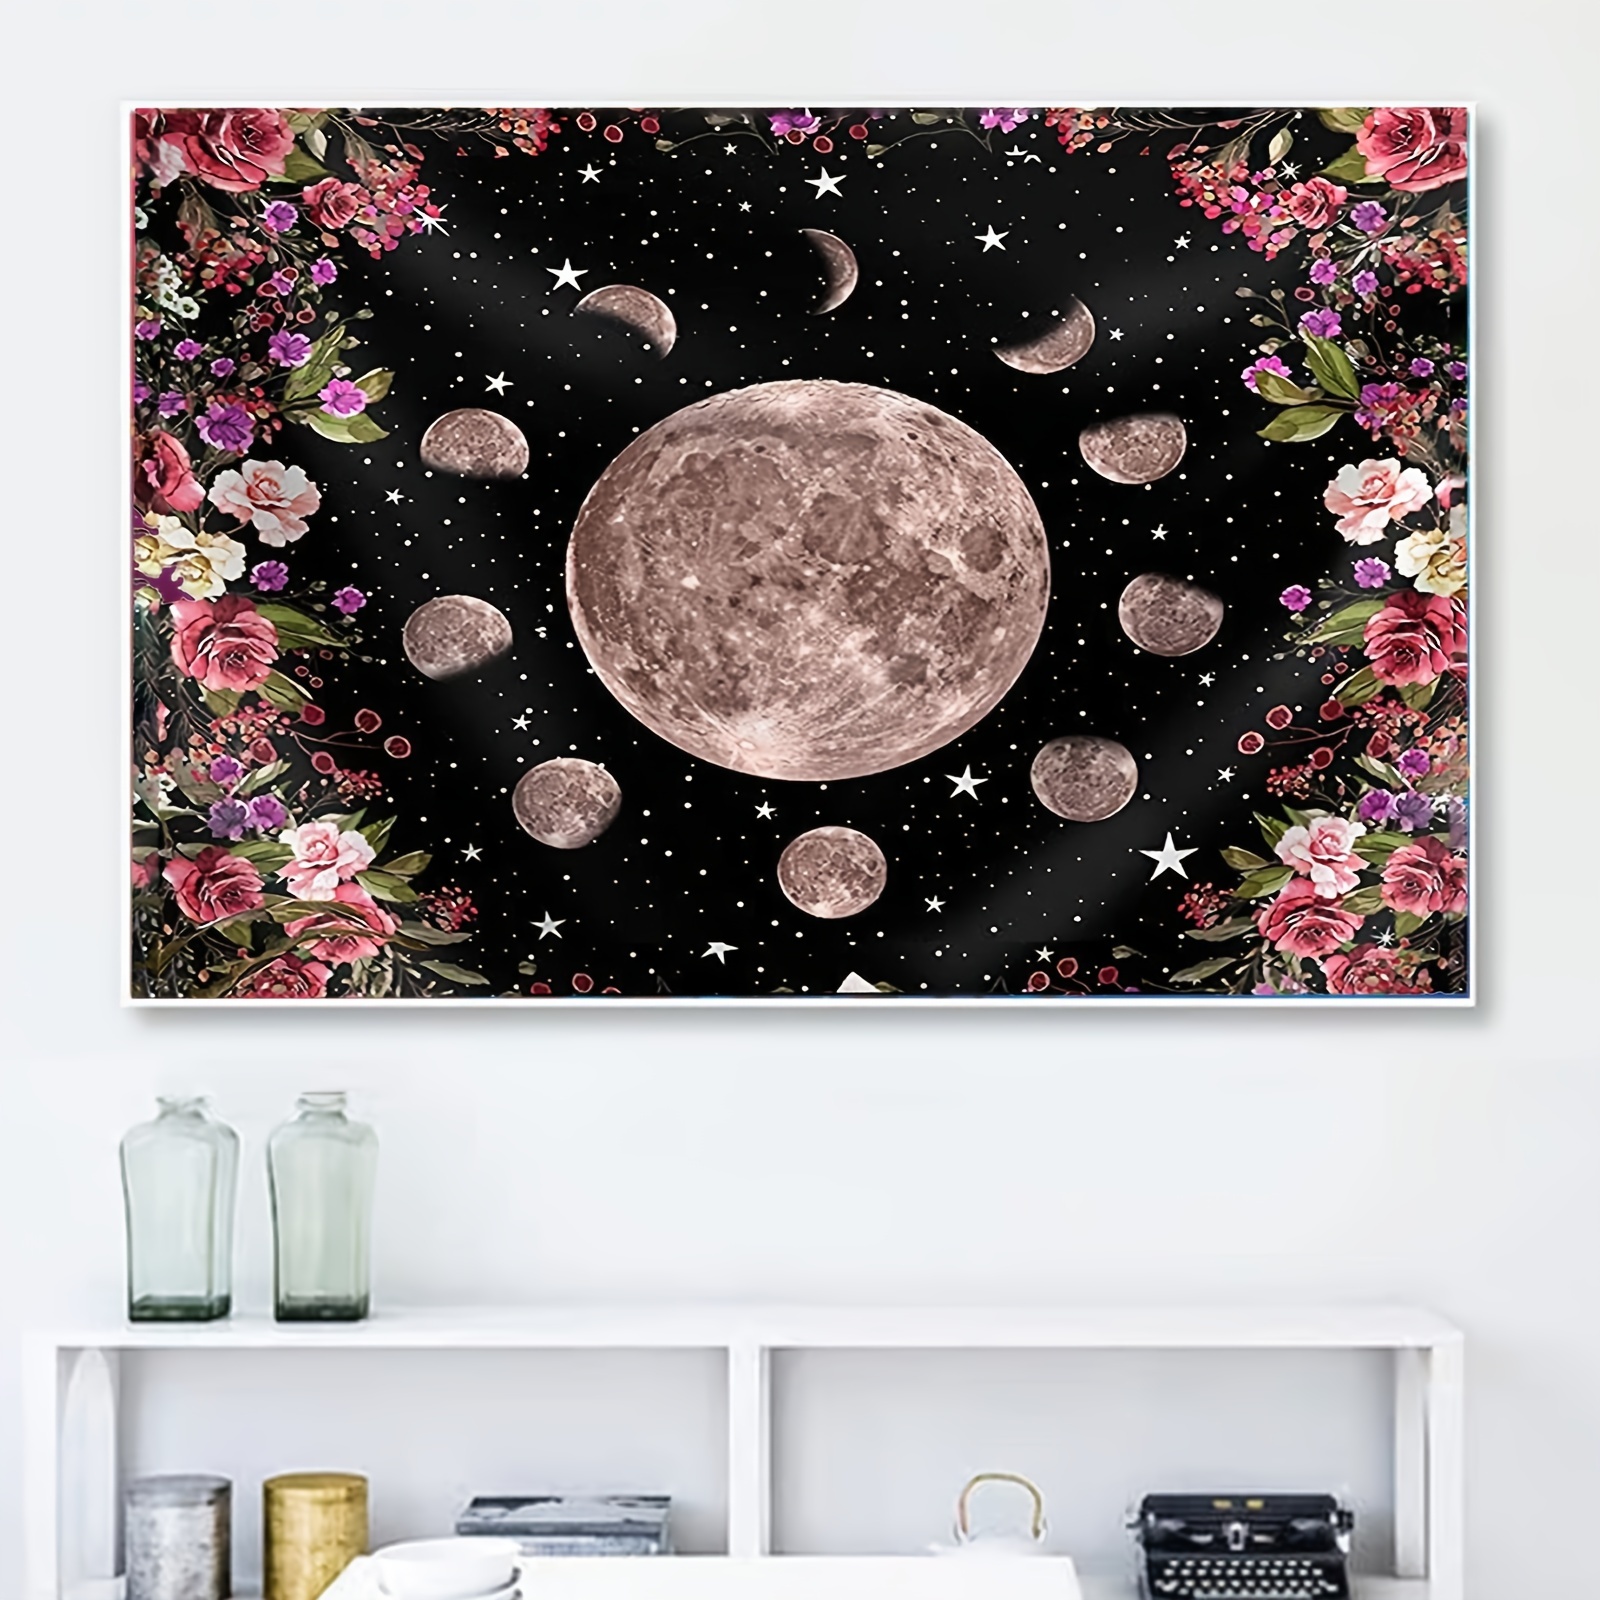 XWJJ Diamond Painting Kits For Adults Lake And Moon Embroidery Full Round  Drill Large Size Diamond Arts Crystal Gem Painting Craft For Home Wall Decor